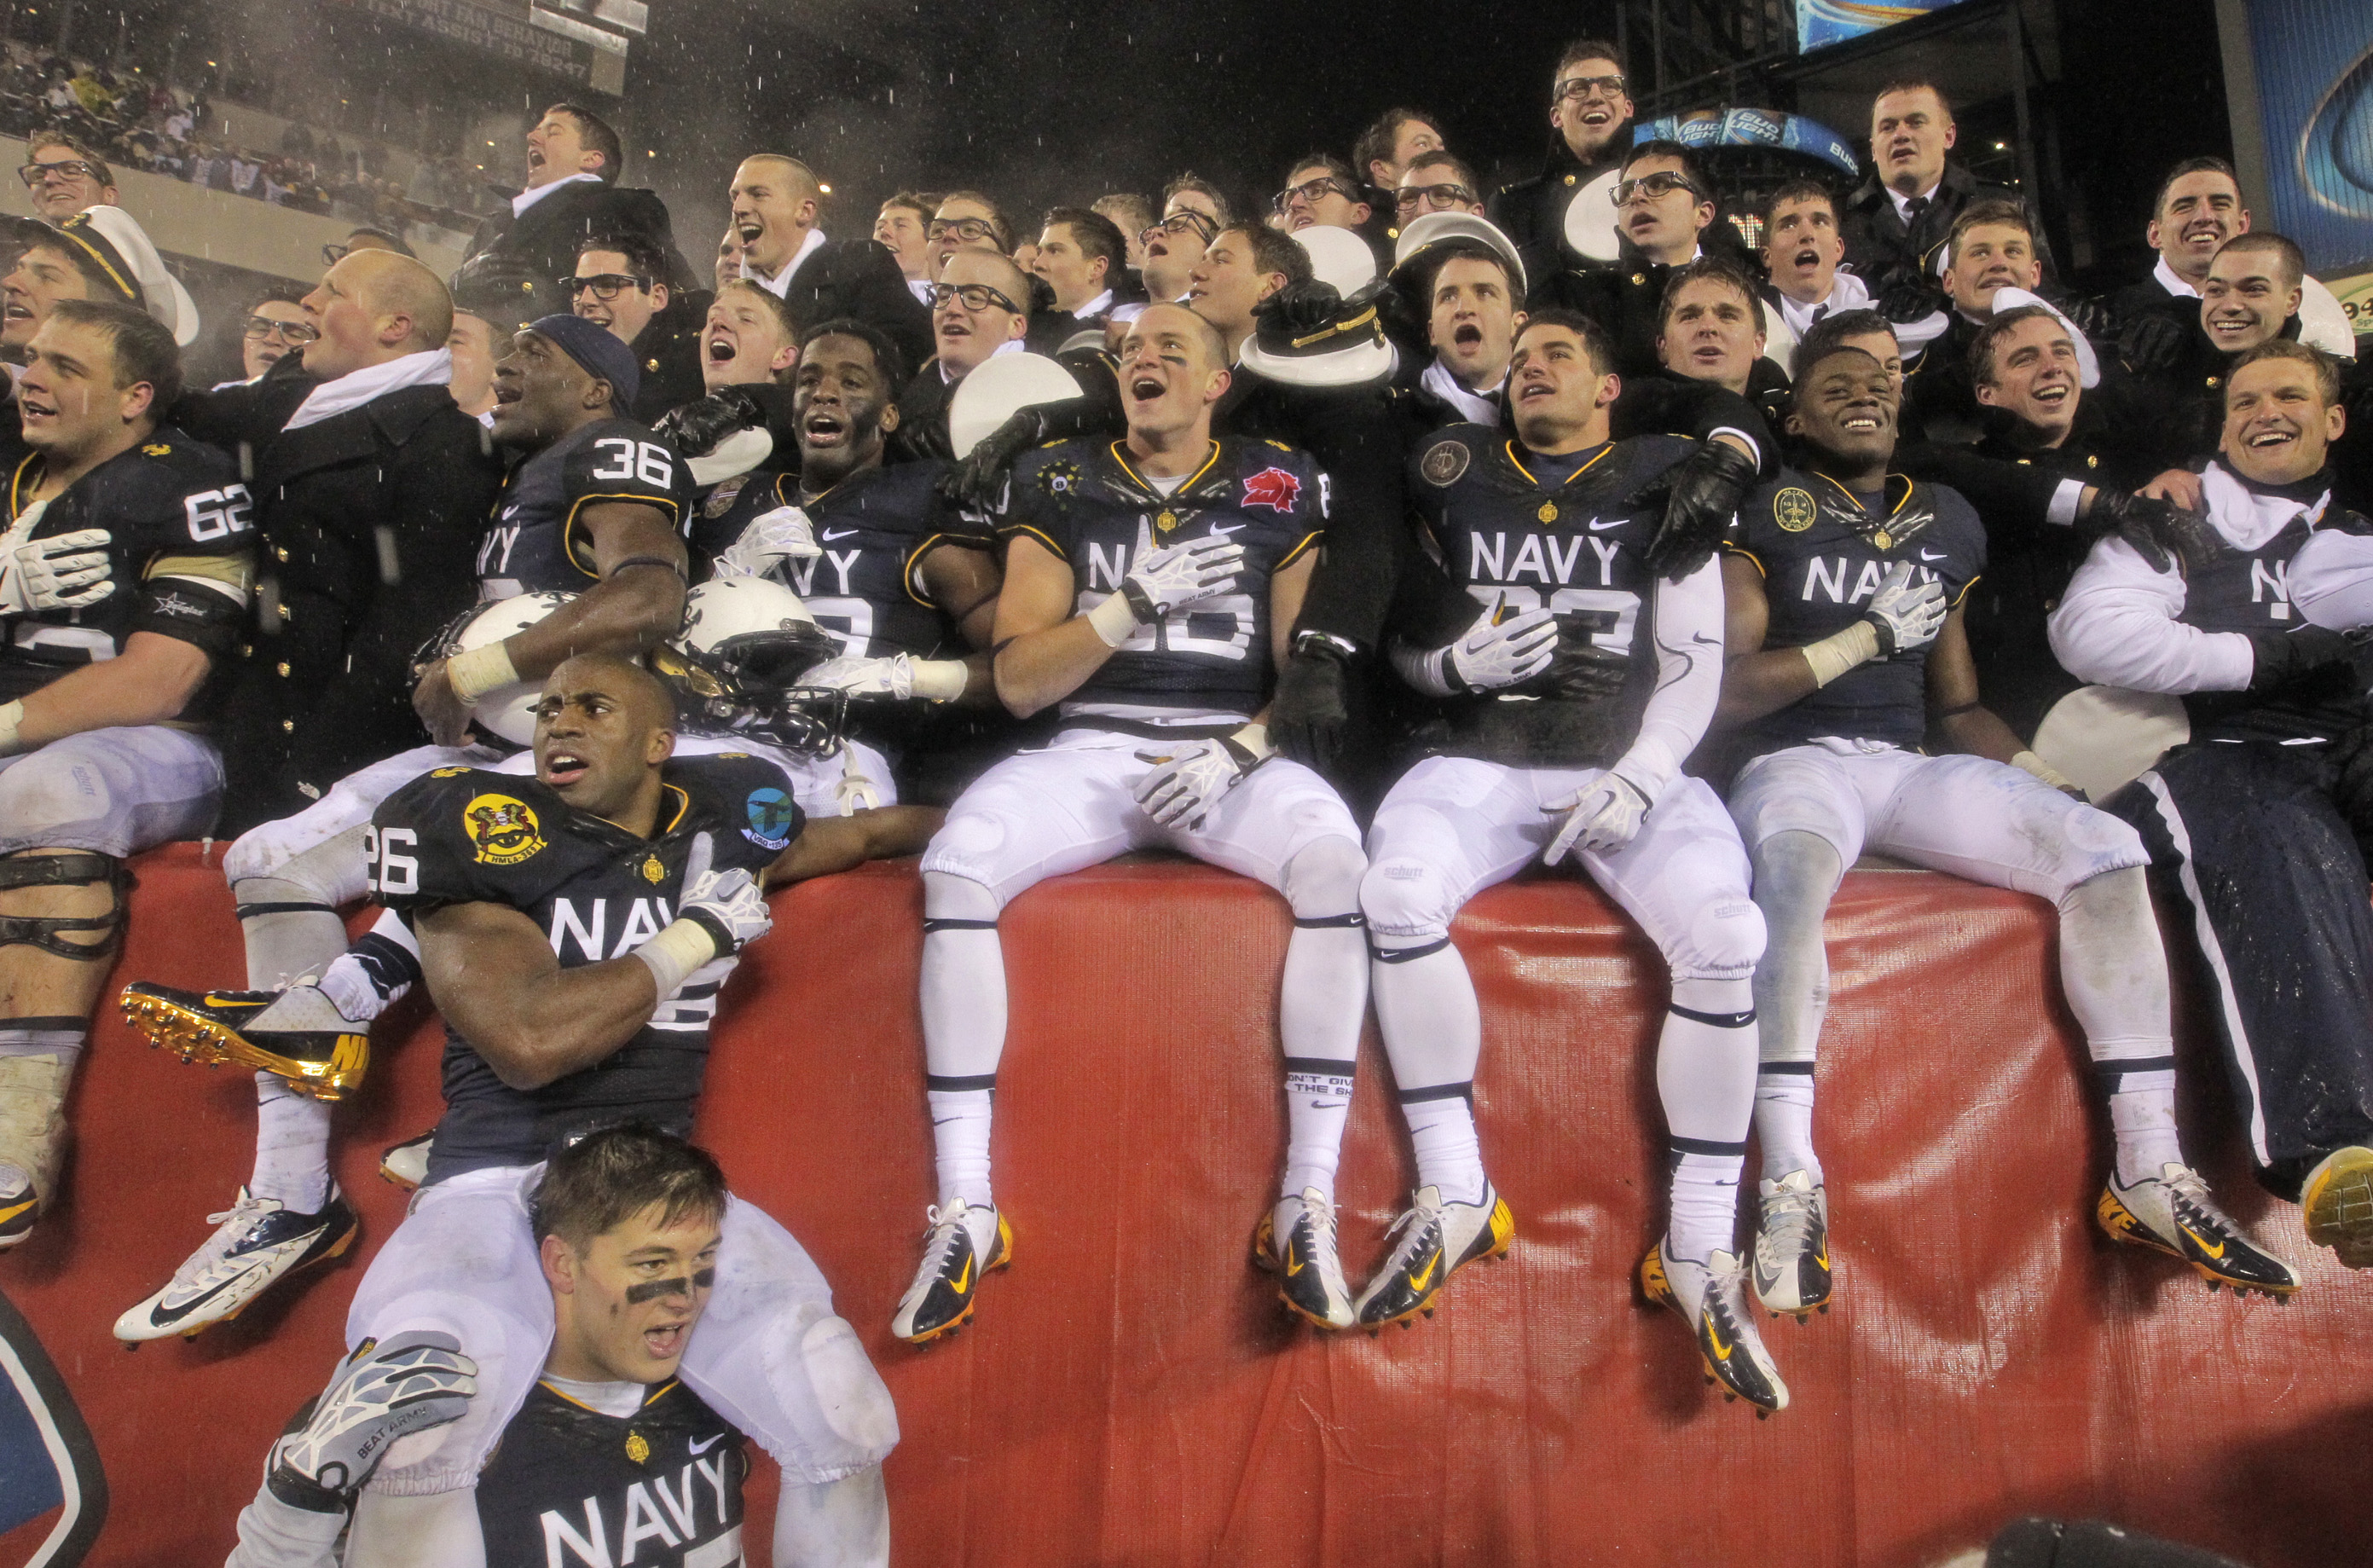 Army-Navy game sites through 2027 revealed, including Gillette